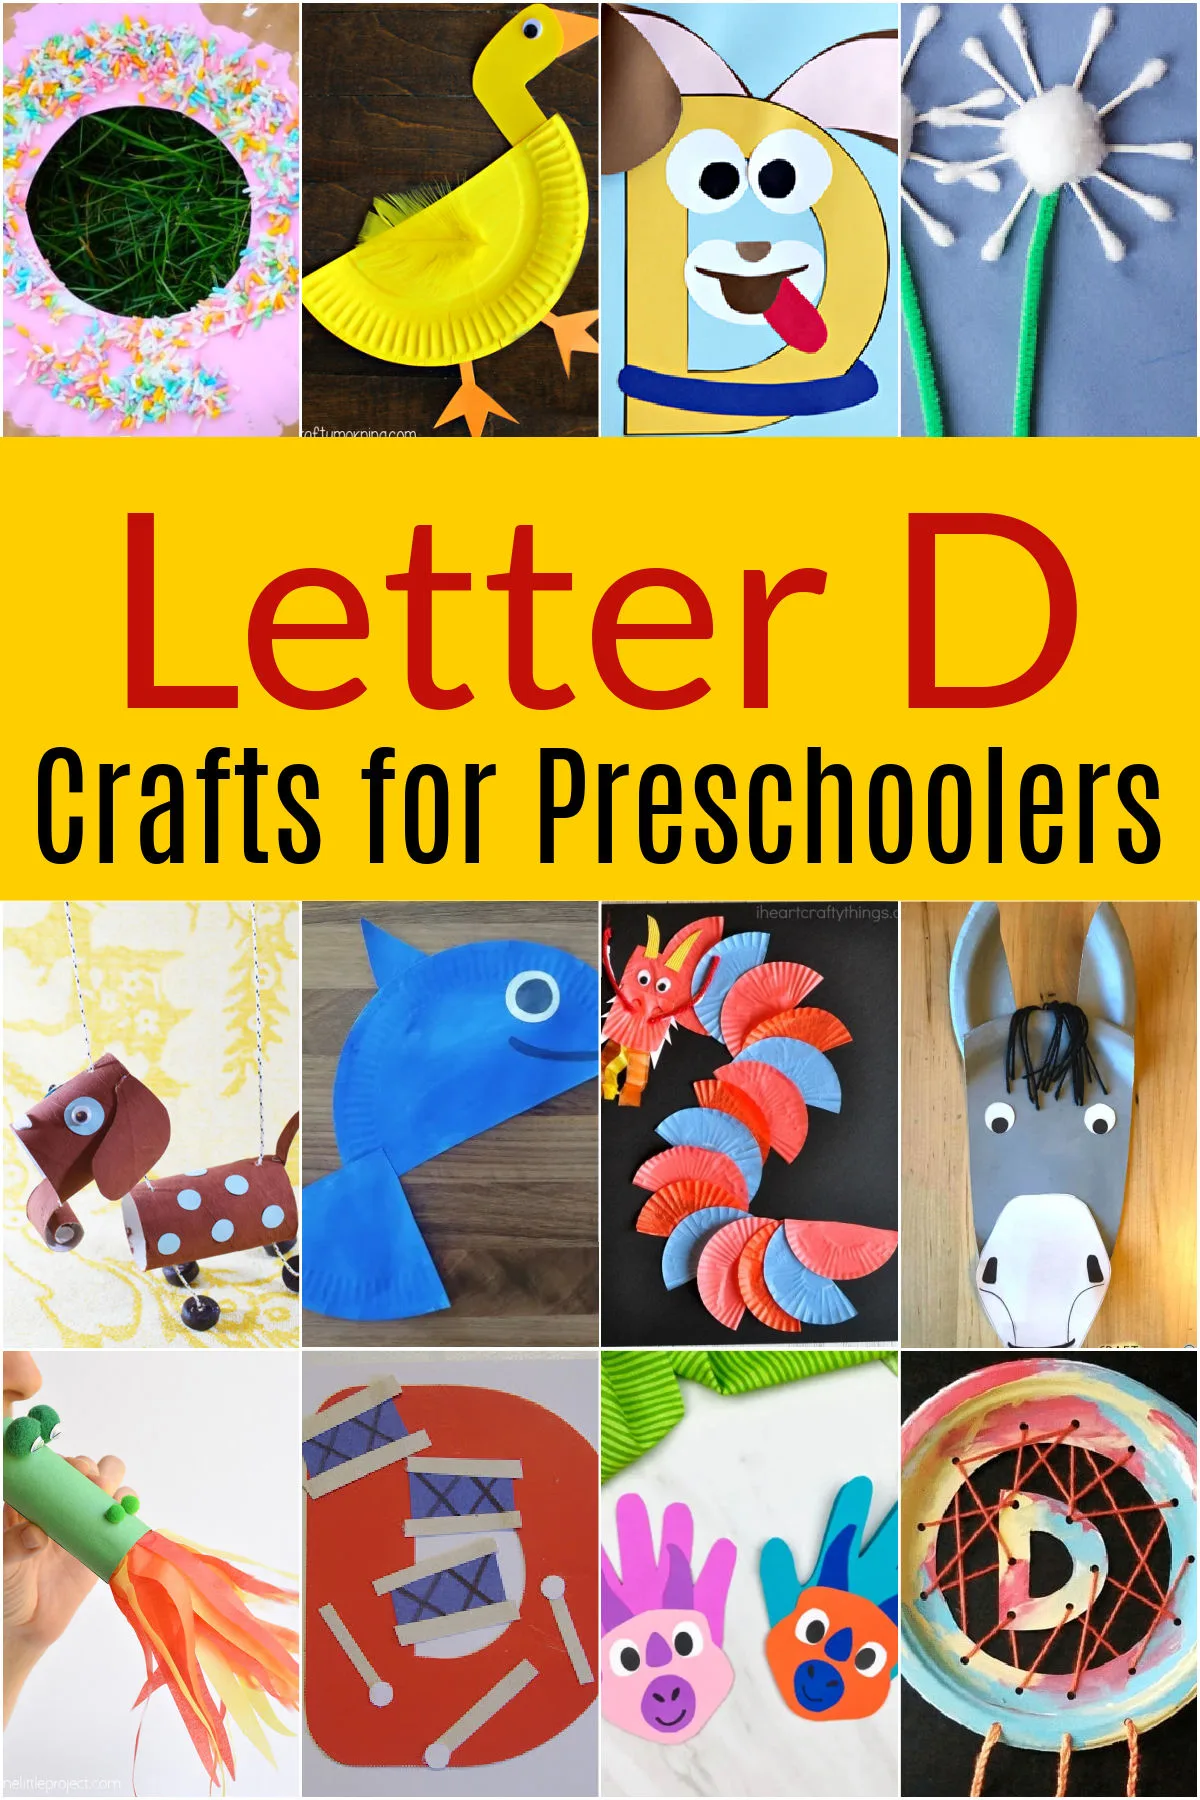 20+ Letter D Crafts for Preschoolers | Today's Creative